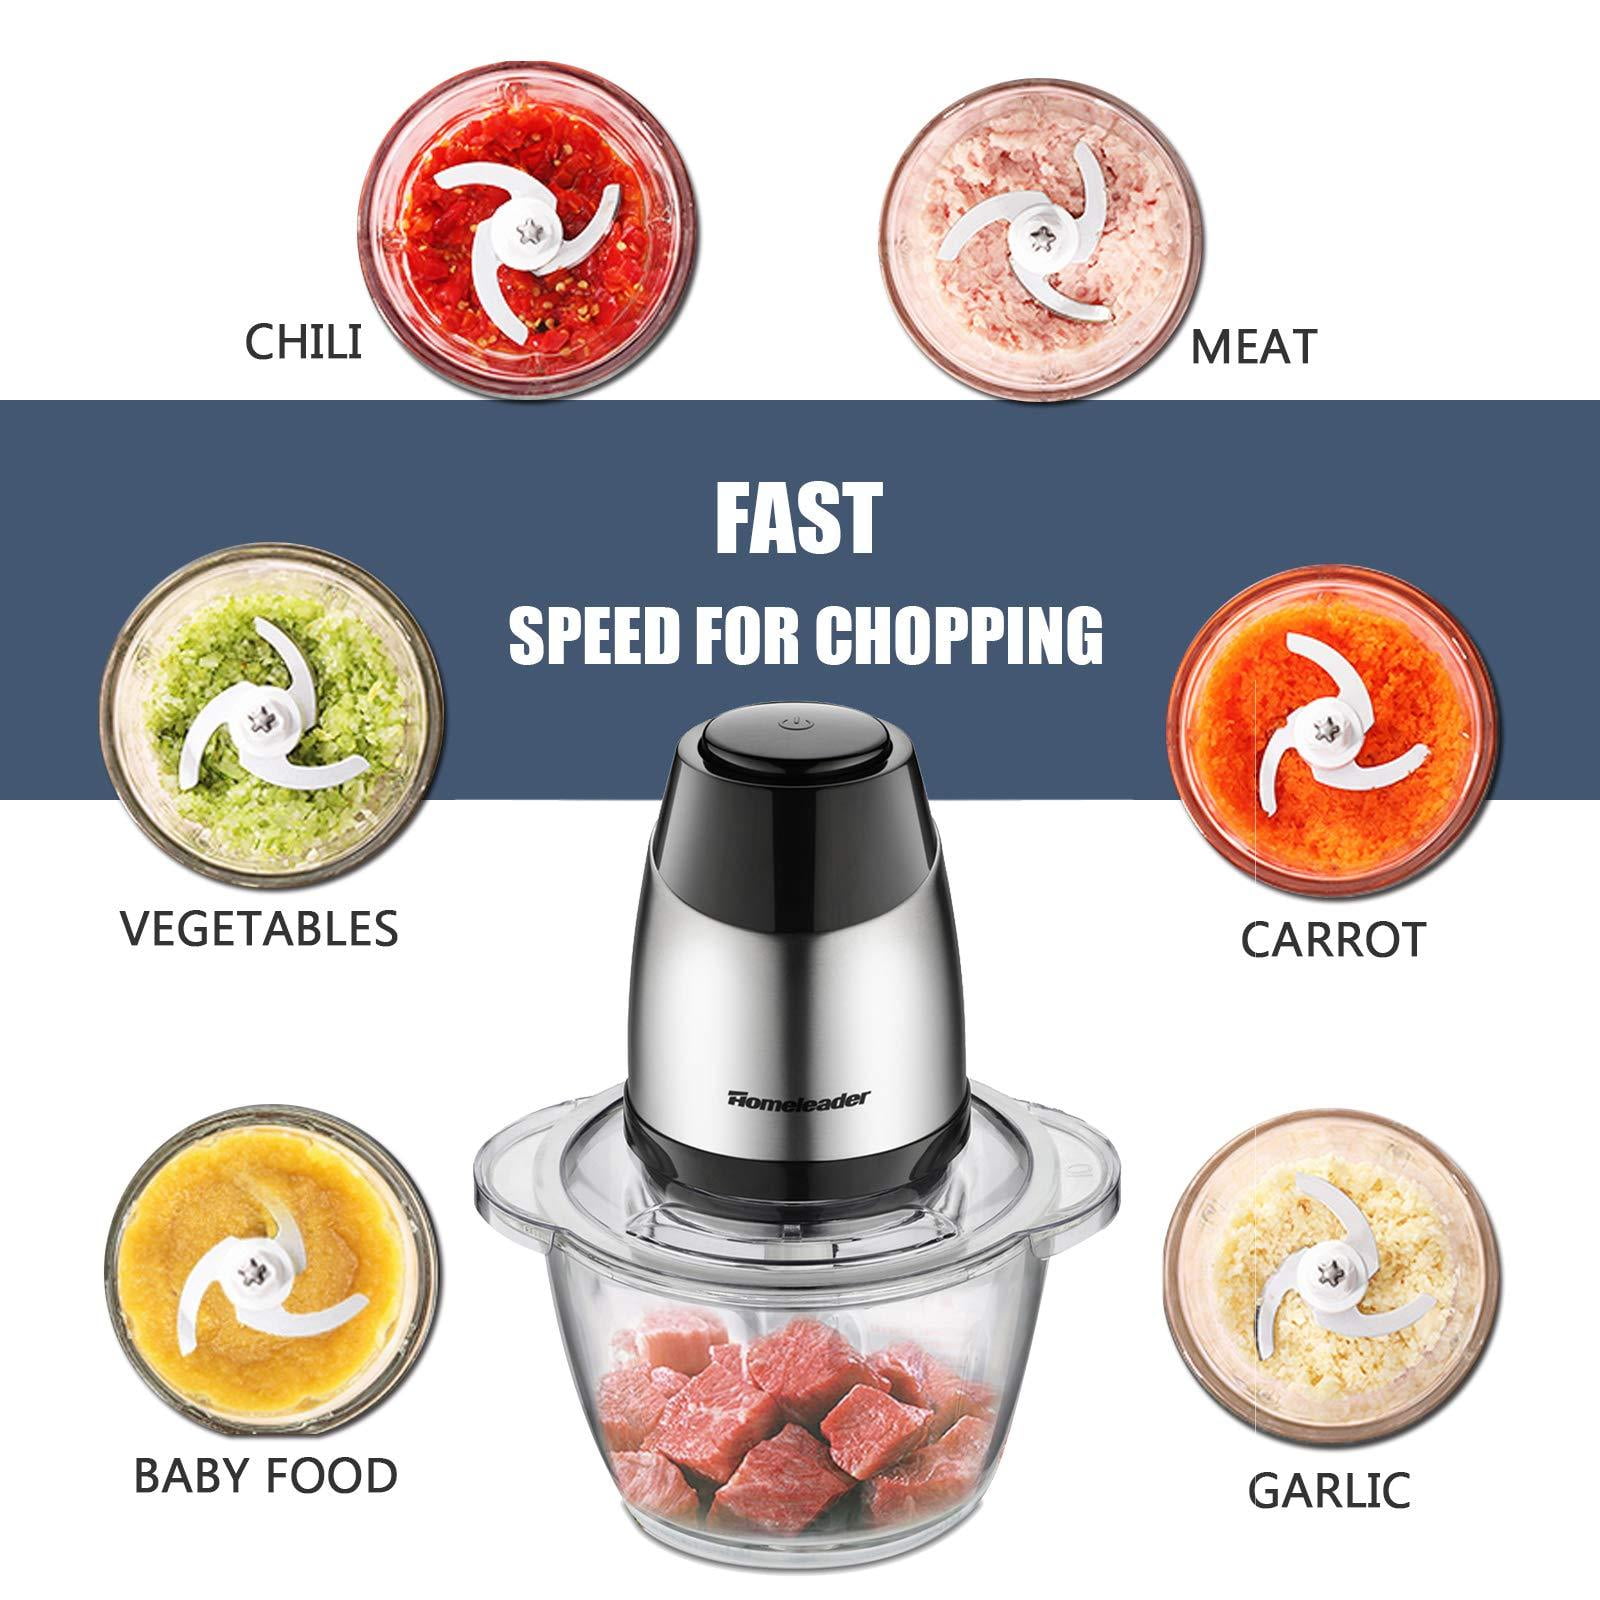 Electric Food Chopper, 8-Cup Food Processor by Homeleader, 2L Glass Bowl  Grinder for Meat, Vegetables, Fruits and Nuts, Stainless Steel Motor Unit  and 4 Sharp Blades, 300W 